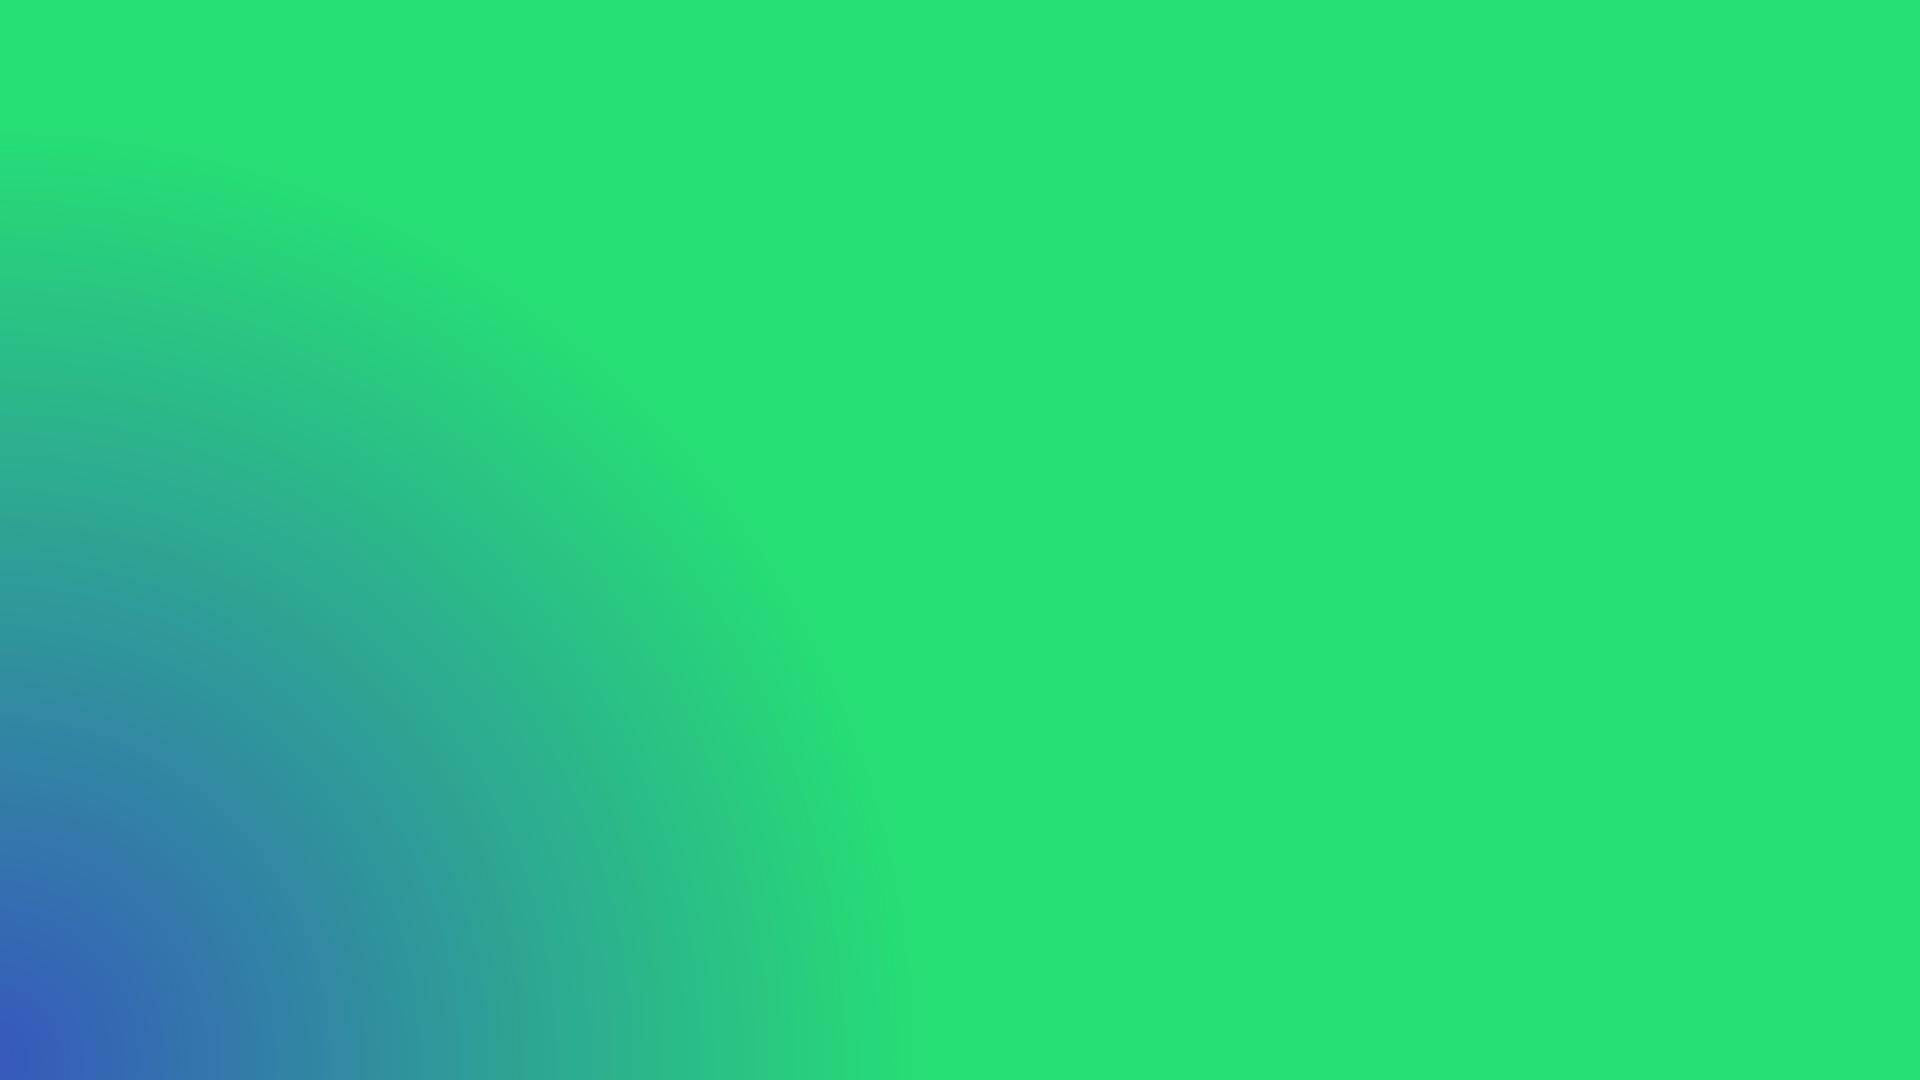 Blue to Green Gradient